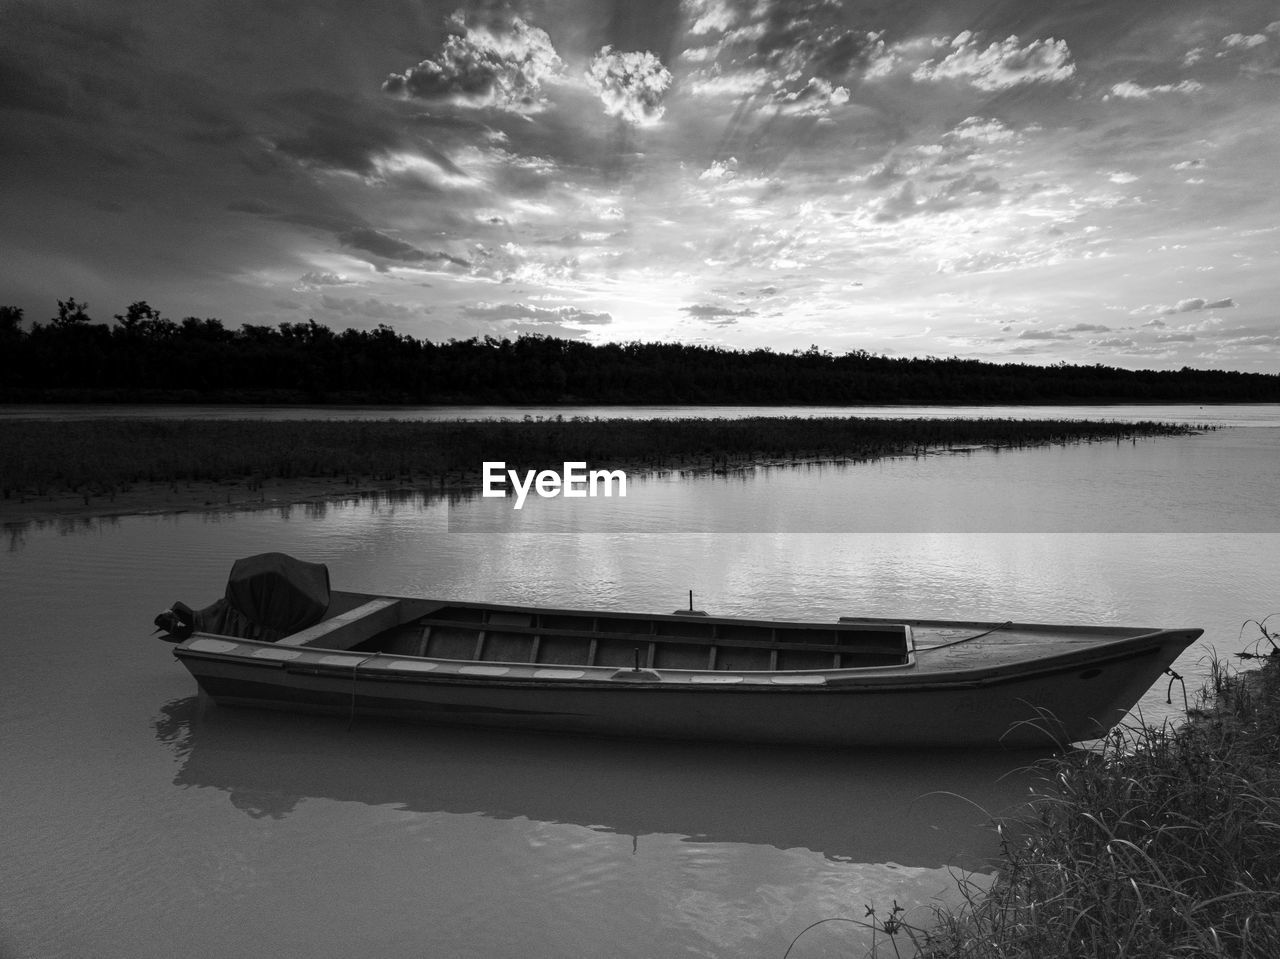 water, nautical vessel, sky, lake, transportation, reflection, cloud, nature, black and white, mode of transportation, vehicle, boat, tranquility, beauty in nature, monochrome photography, scenics - nature, monochrome, tranquil scene, no people, moored, plant, landscape, outdoors, travel, rowboat, tree, environment, watercraft, non-urban scene, travel destinations, beach